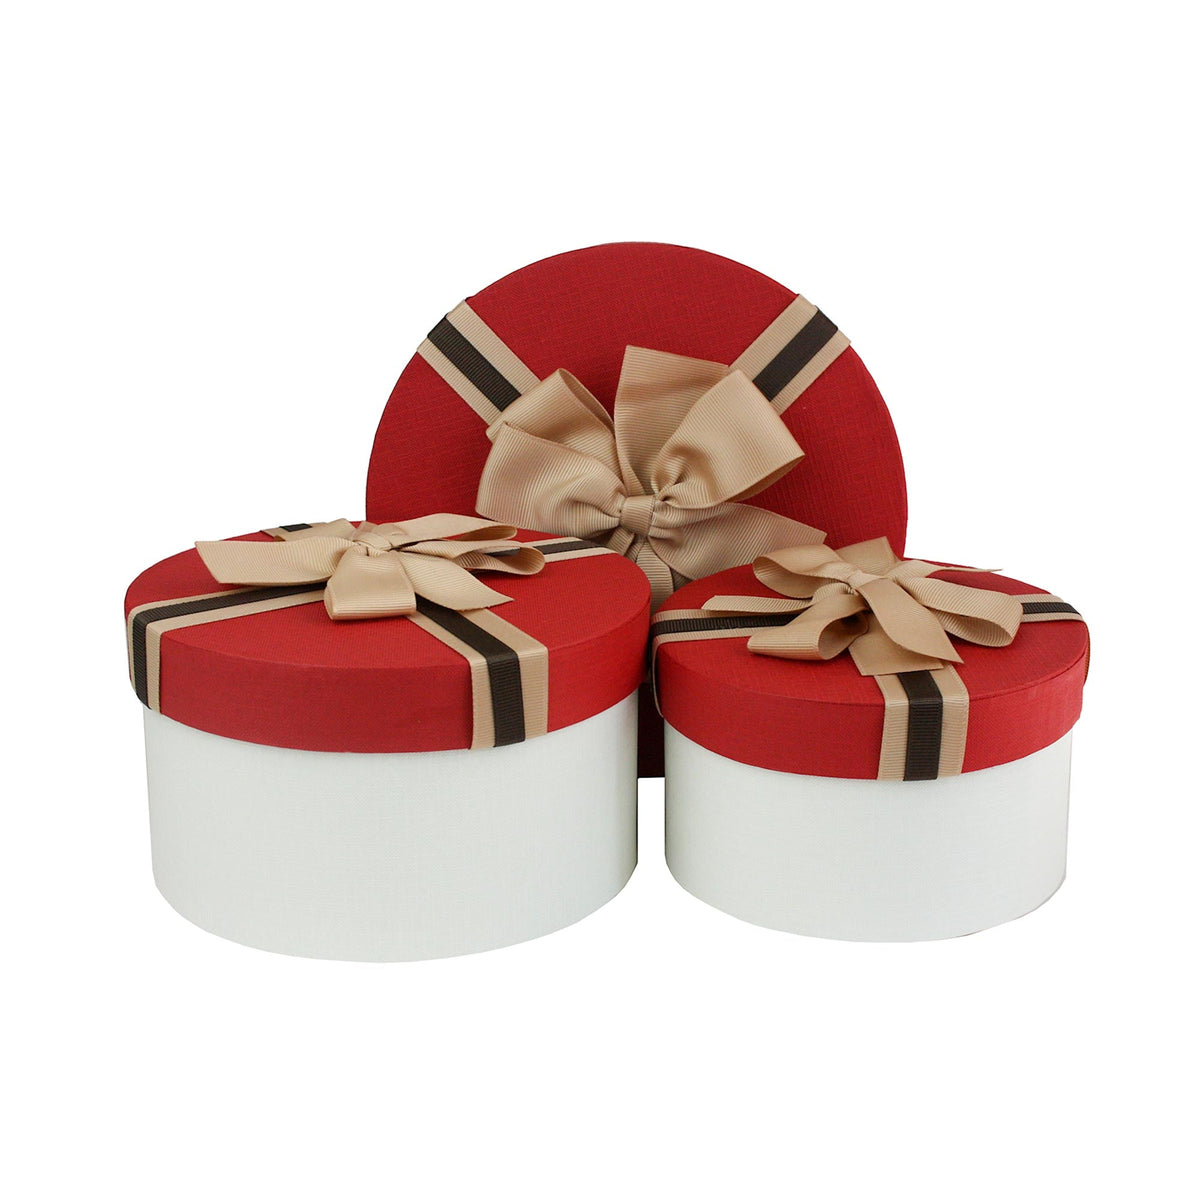 Set of 3 Cream/Red Gift Boxes With Brown Satin Ribbon (Sizes Available)